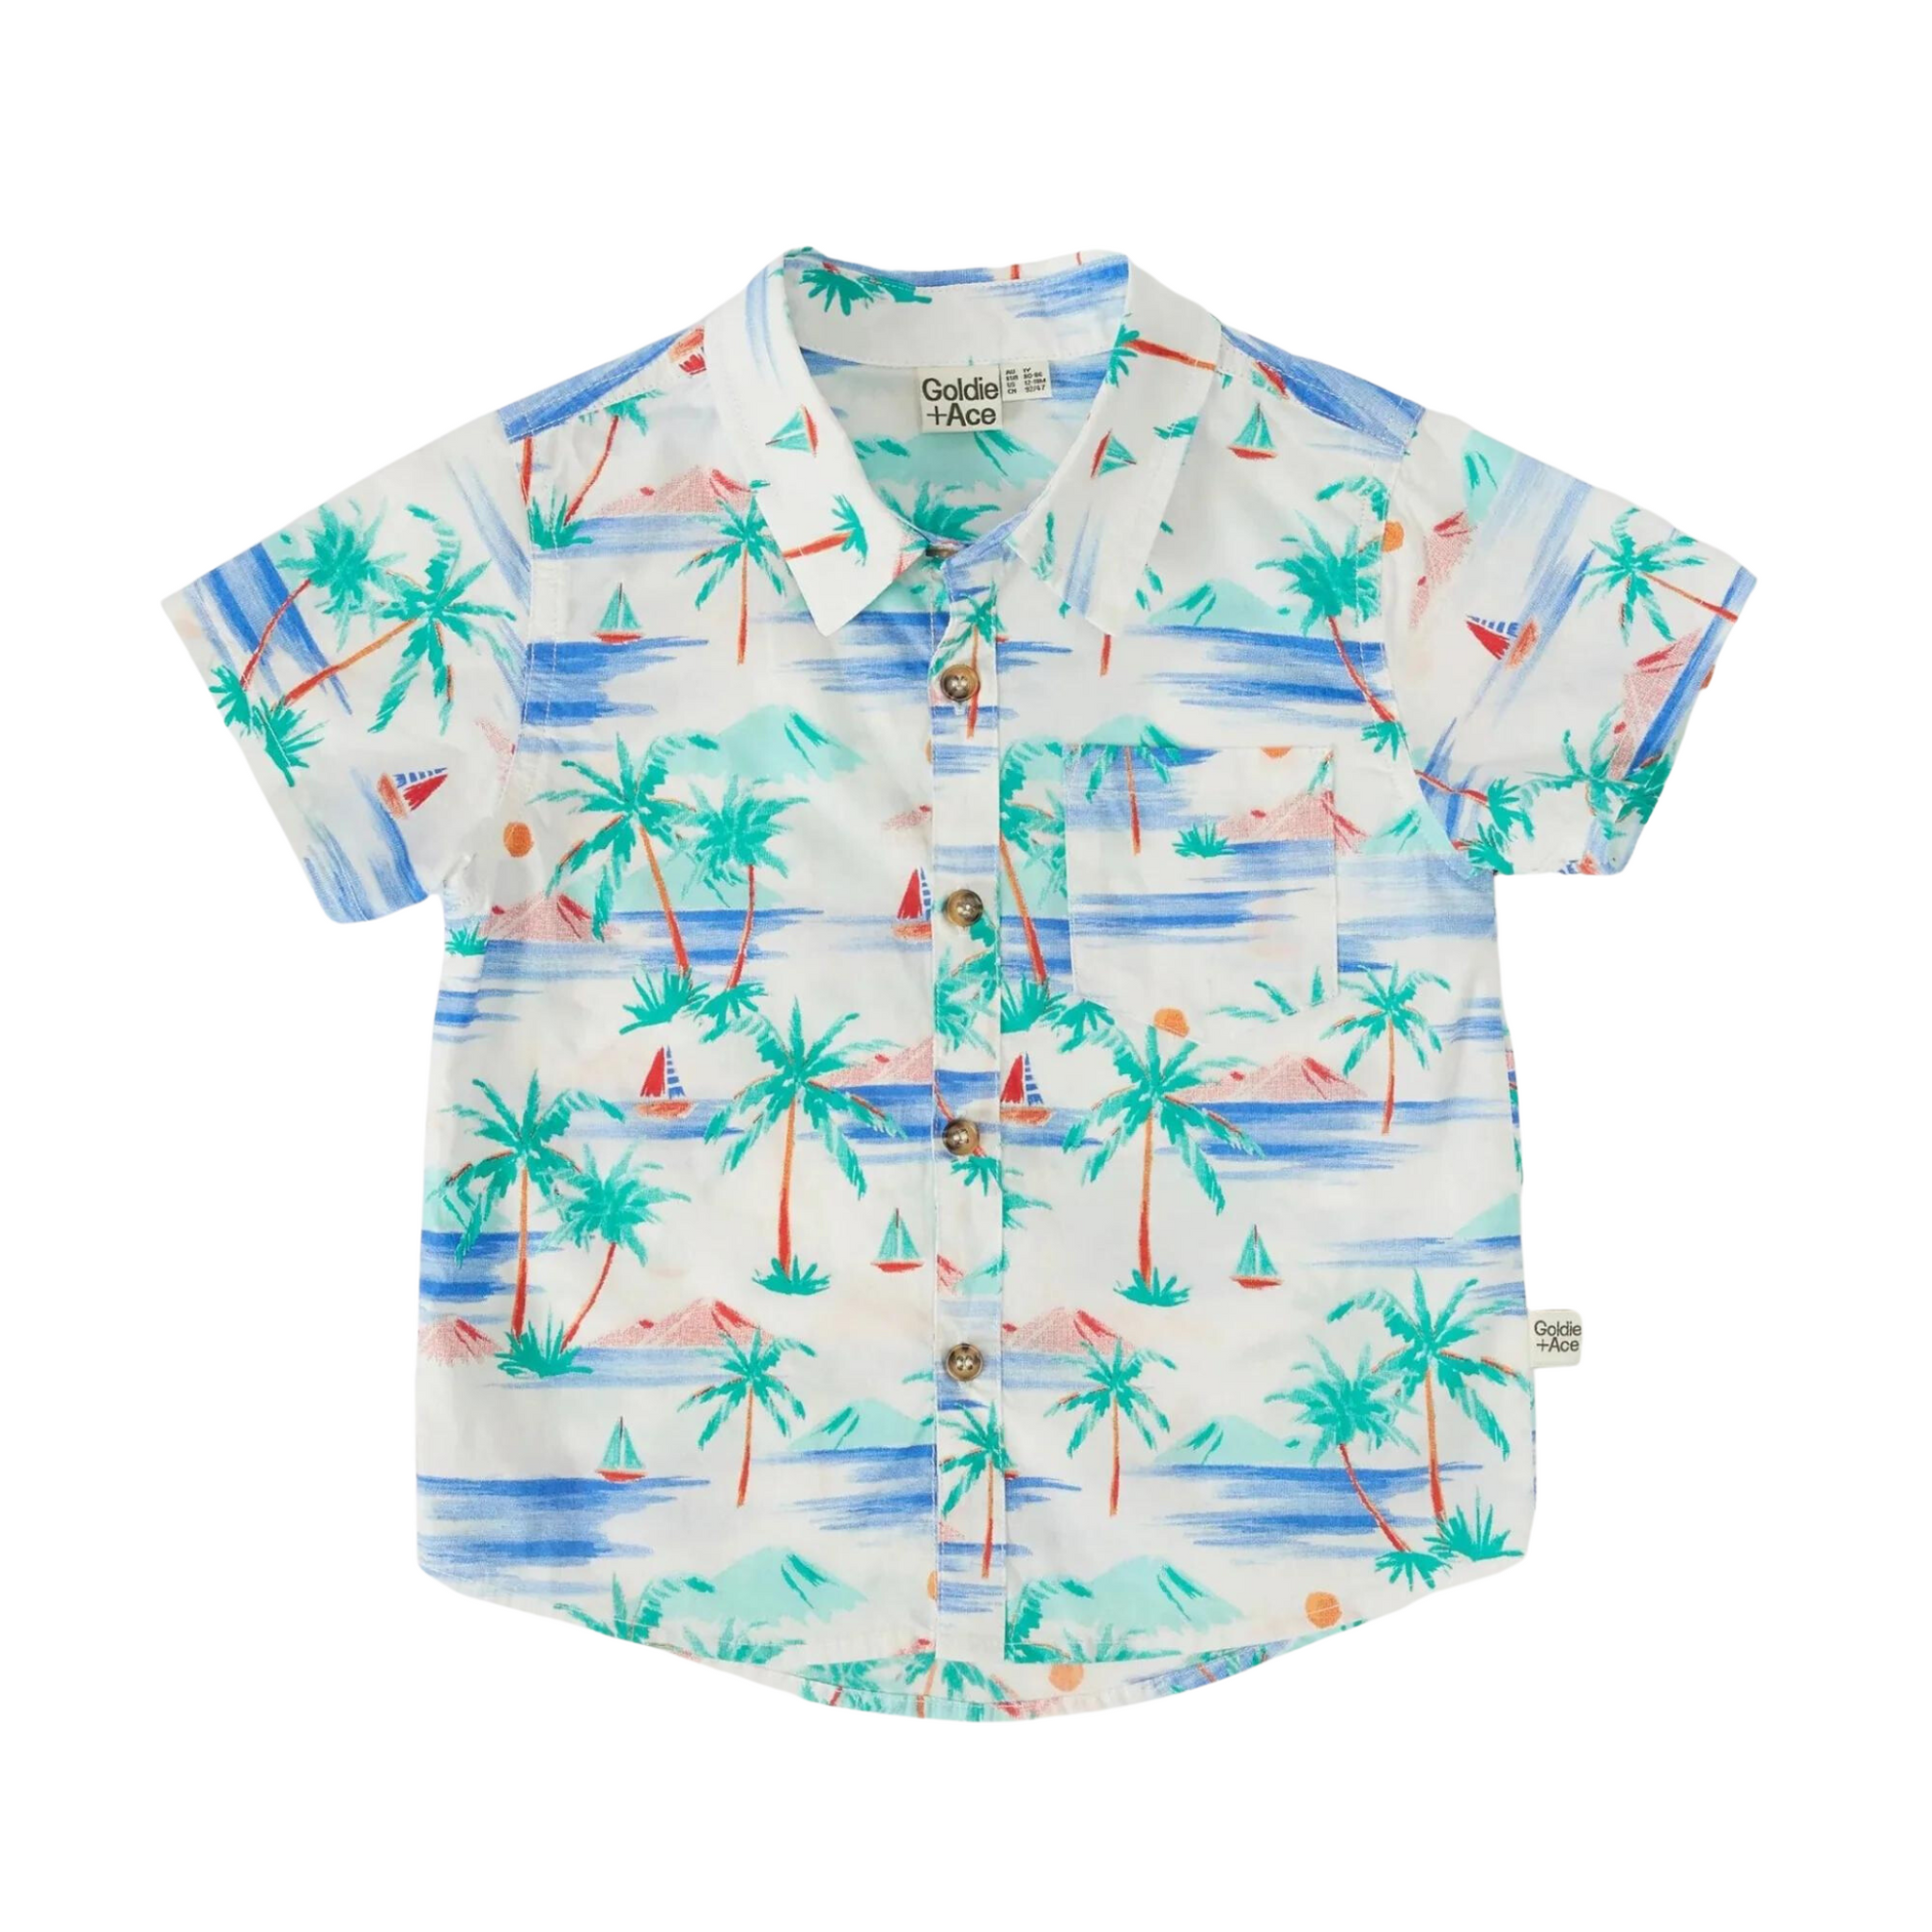 Goldie and Ace Holiday Cotton Shirt -  Paradise White